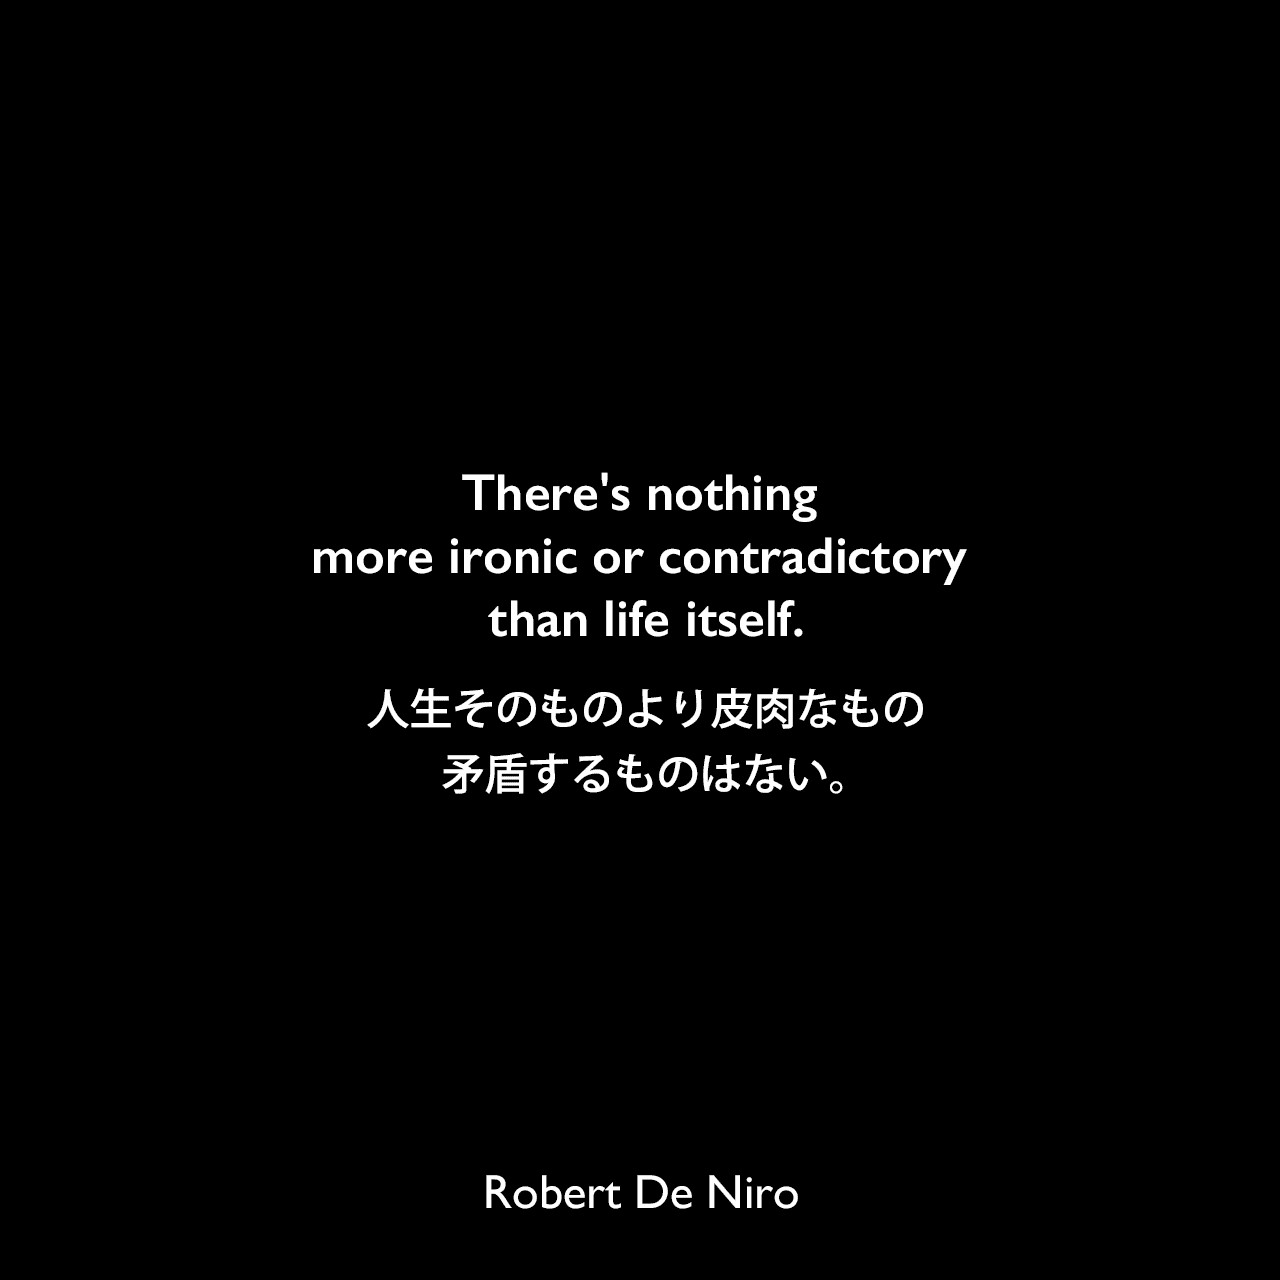 There's nothing more ironic or contradictory than life itself.人生そのものより皮肉なもの、矛盾するものはない。Robert De Niro